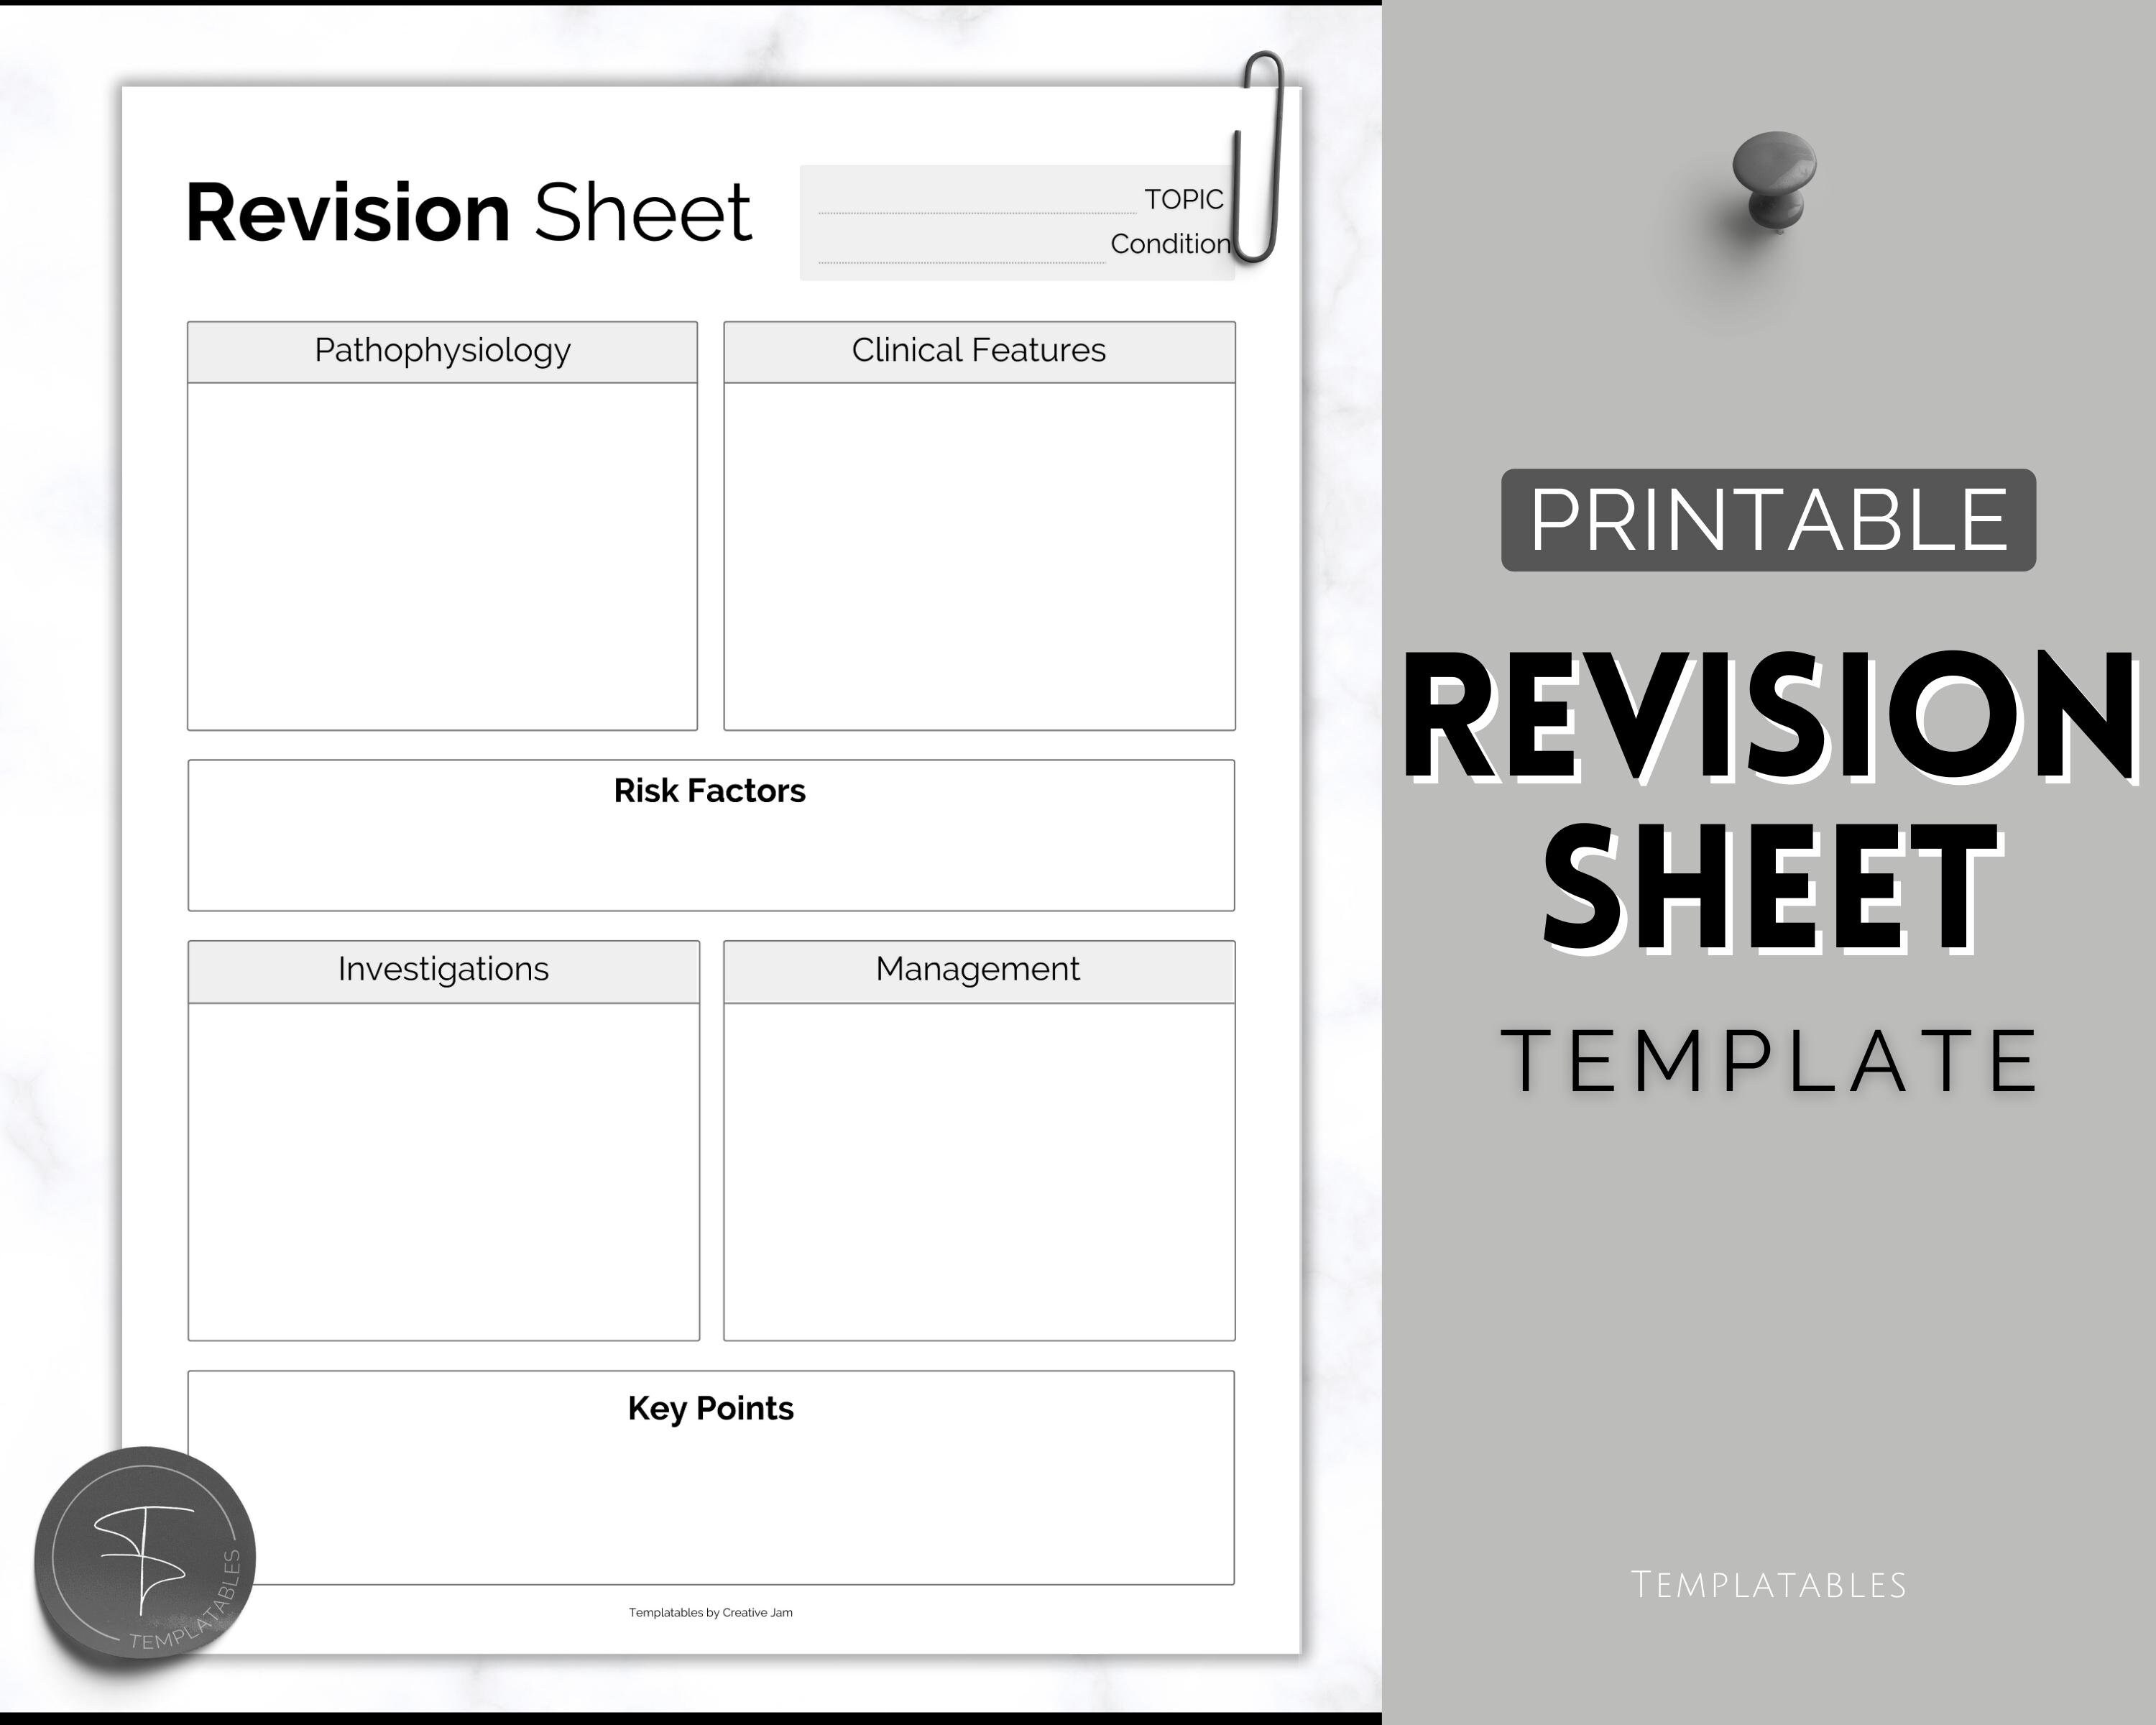 Student Tooth Gems Class Handout Notes, Revision Theory Add Ons,  Information Sheet, Tooth Gems Protocols Reference Sheet, Editable in Canva  -  Sweden